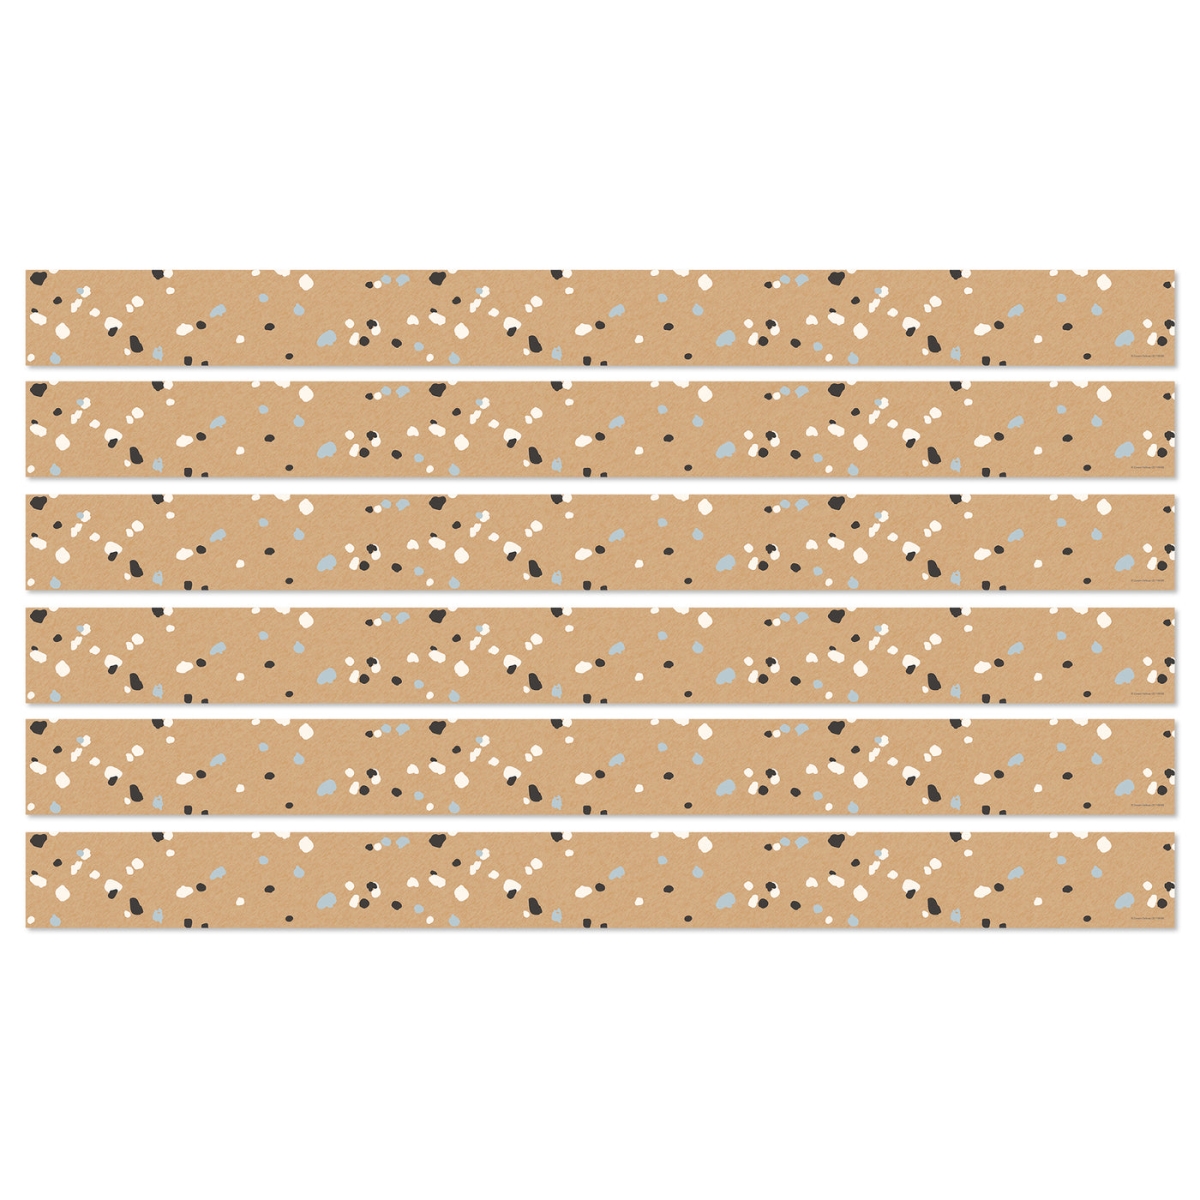 Picture of Carson Dellosa Education CD-108496-6 Speckled Kraft Paper Straight Border - Pack of 6